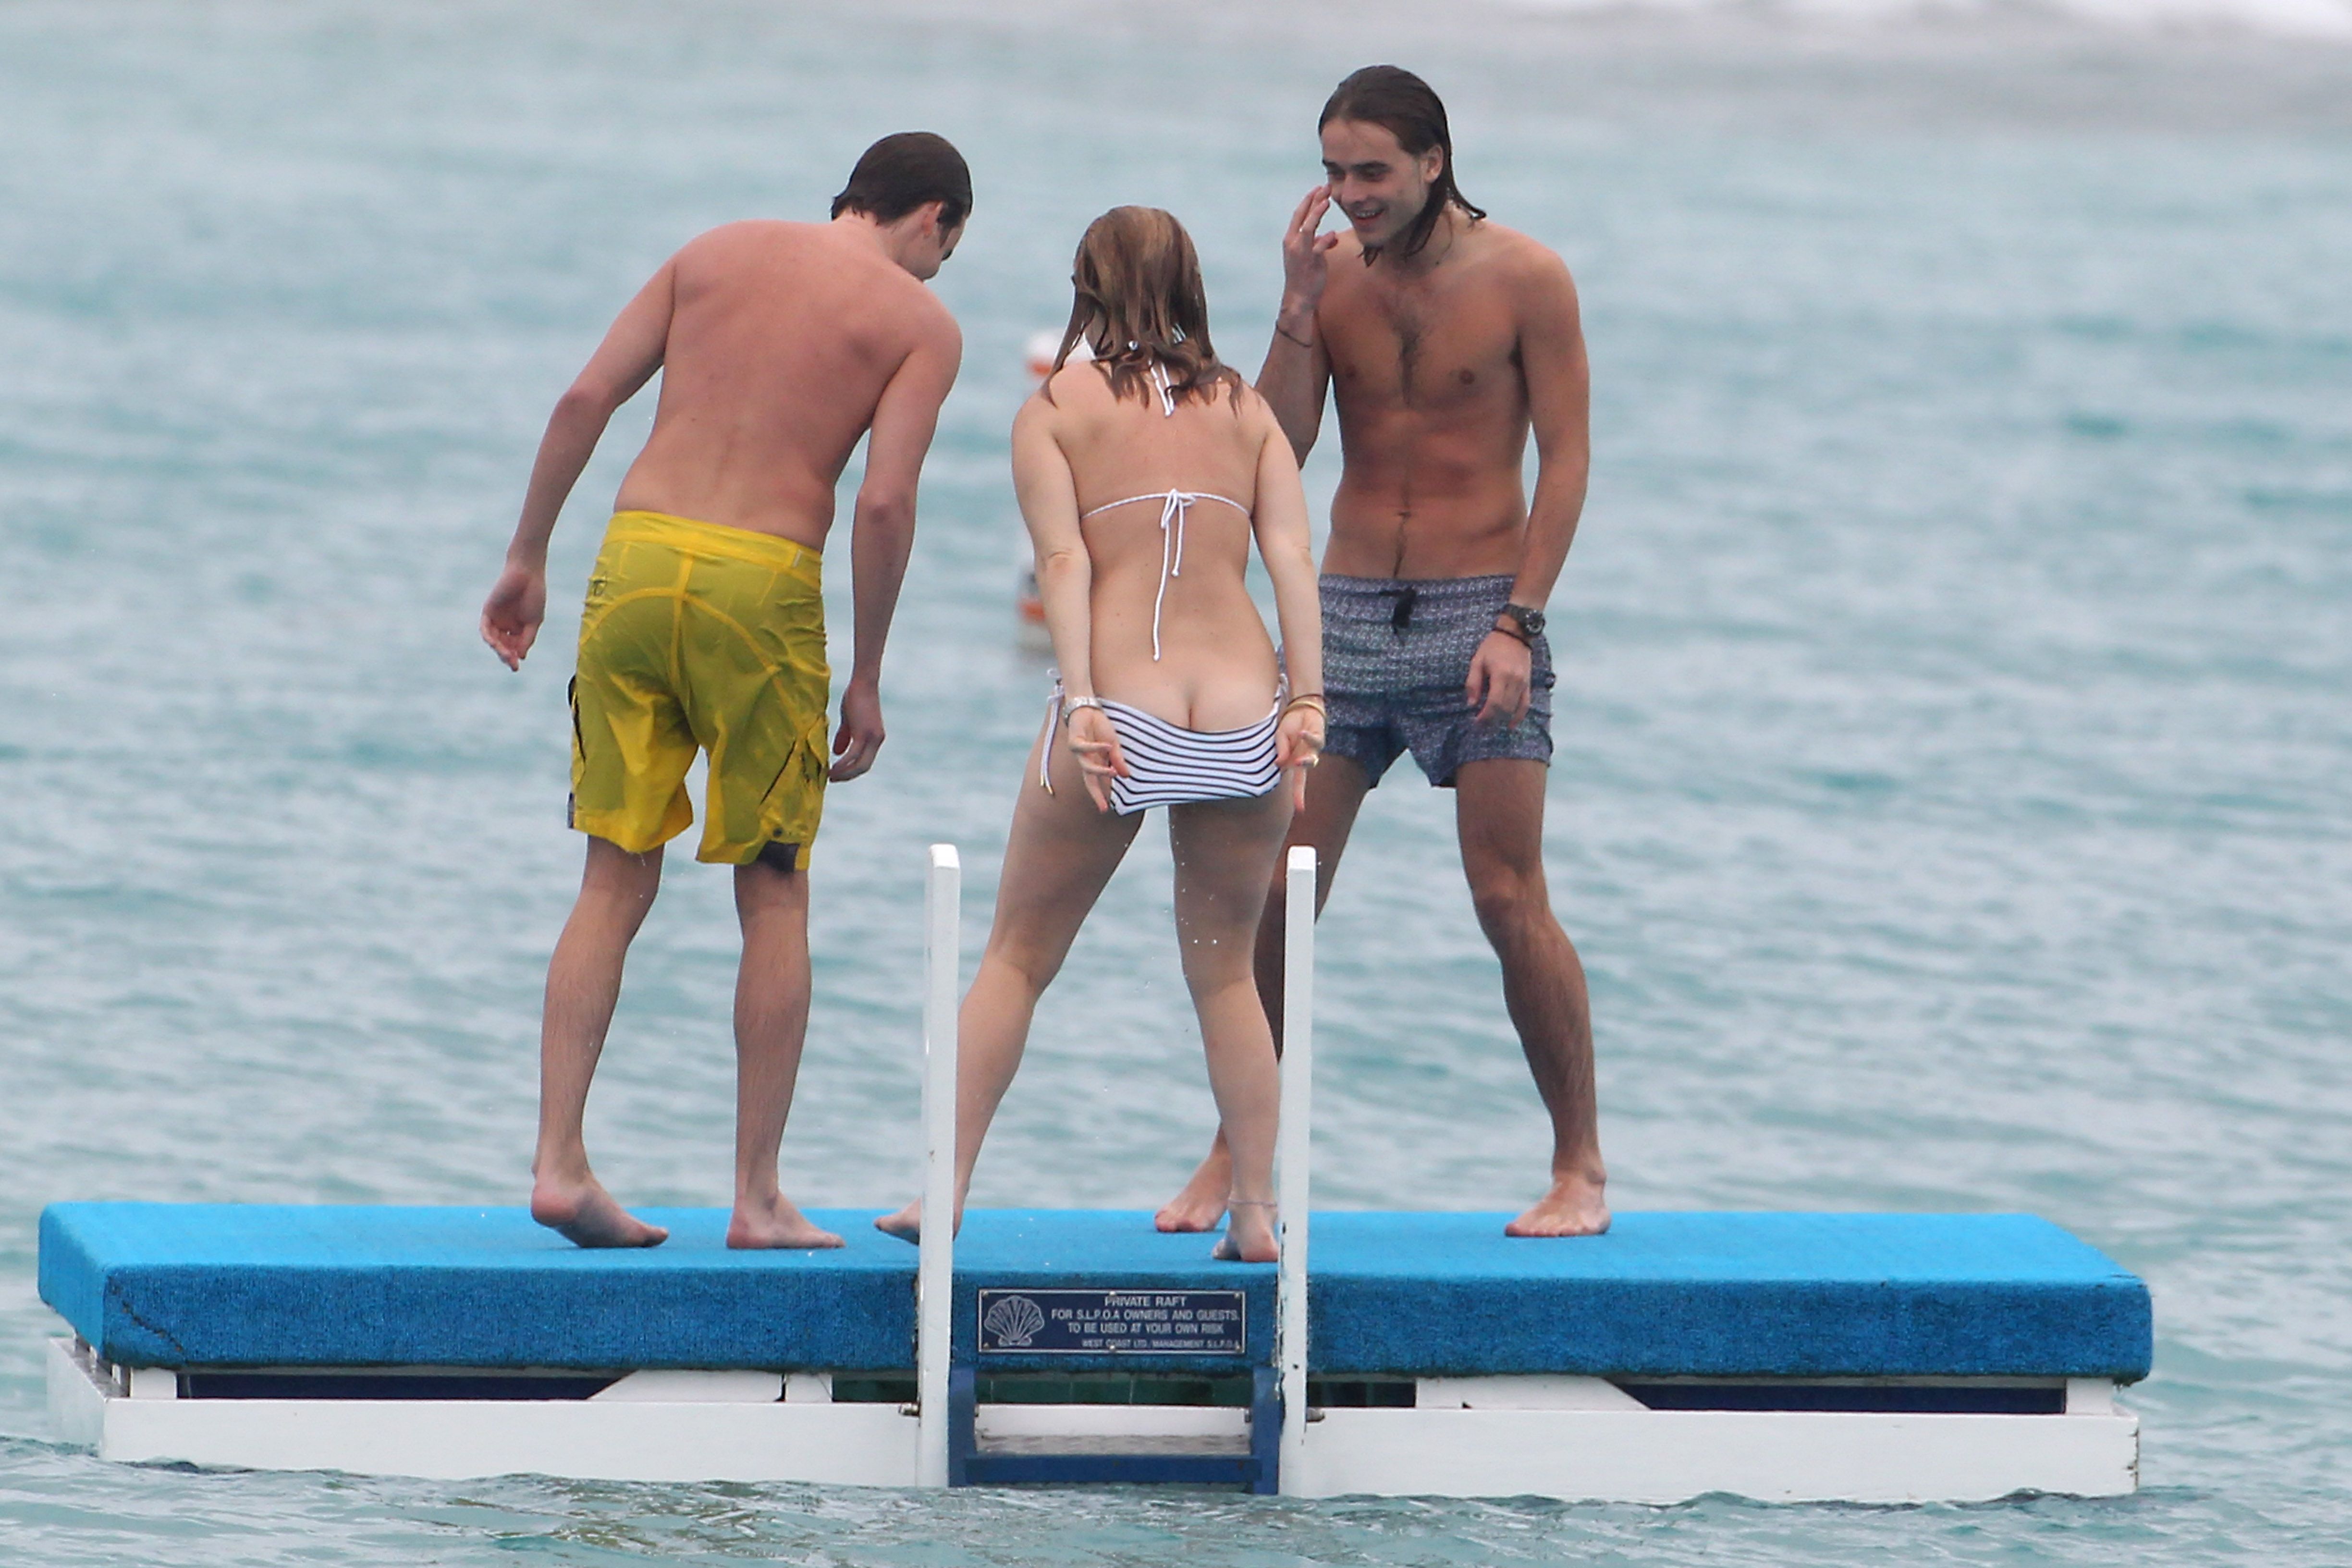 Alice Eve playing @ the beach in Barbados | Celebrity Oopsies